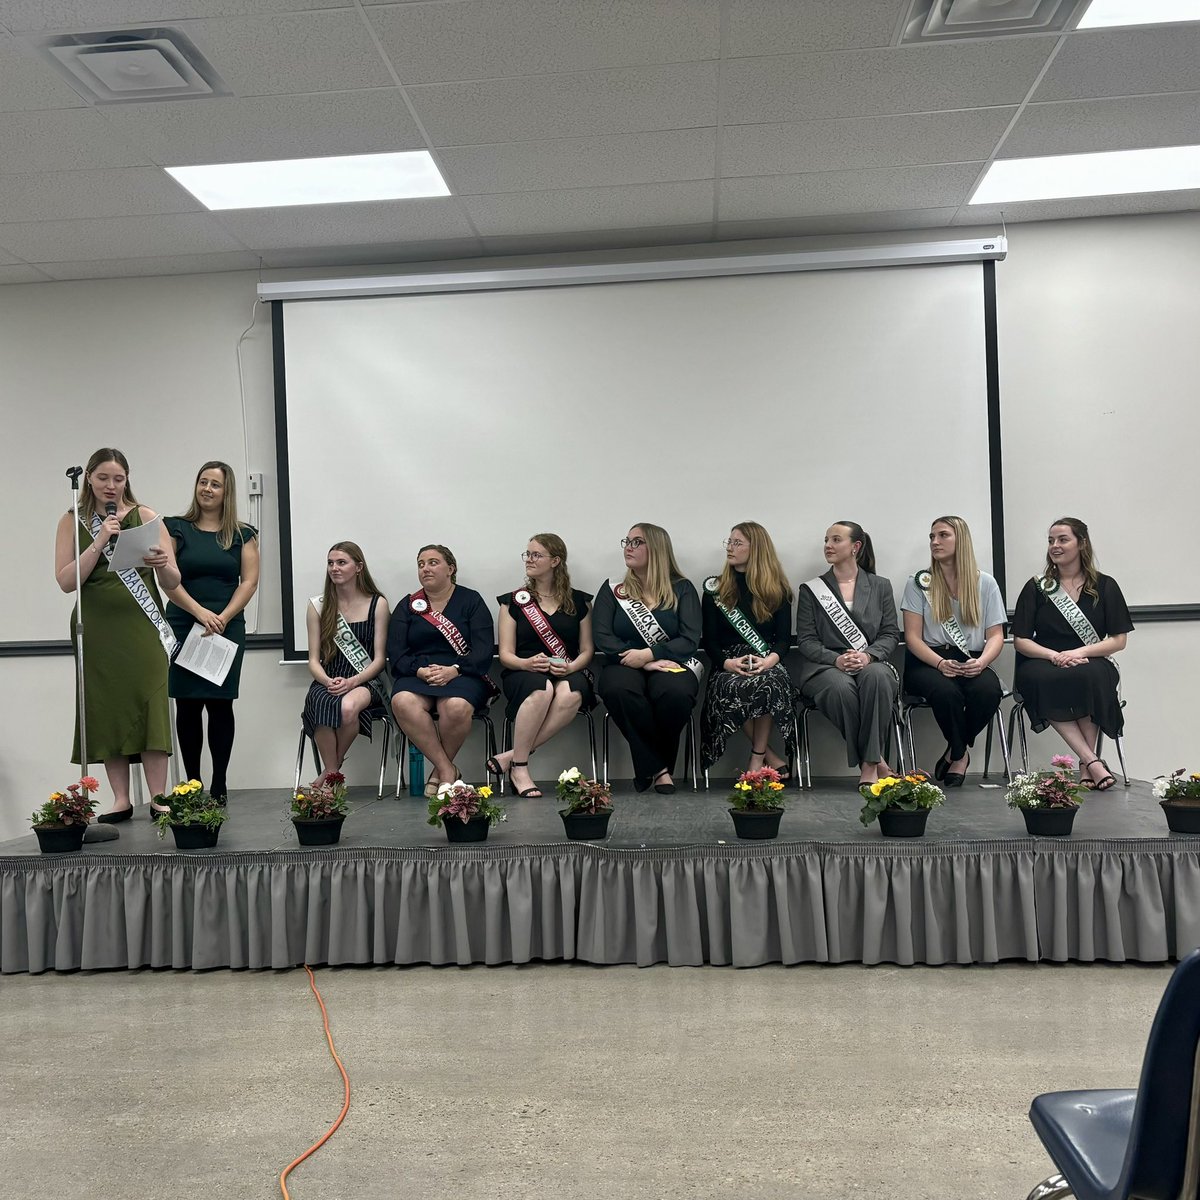 It was great to attended the District 8 Ambassador Competition last evening. For the past 25 yr, the Ag Societies across Huron & Perth have come together to support youth leadership. Congrats to Faith Knechtel from Stratford on becoming the 24-25 District 8 Ambassador!